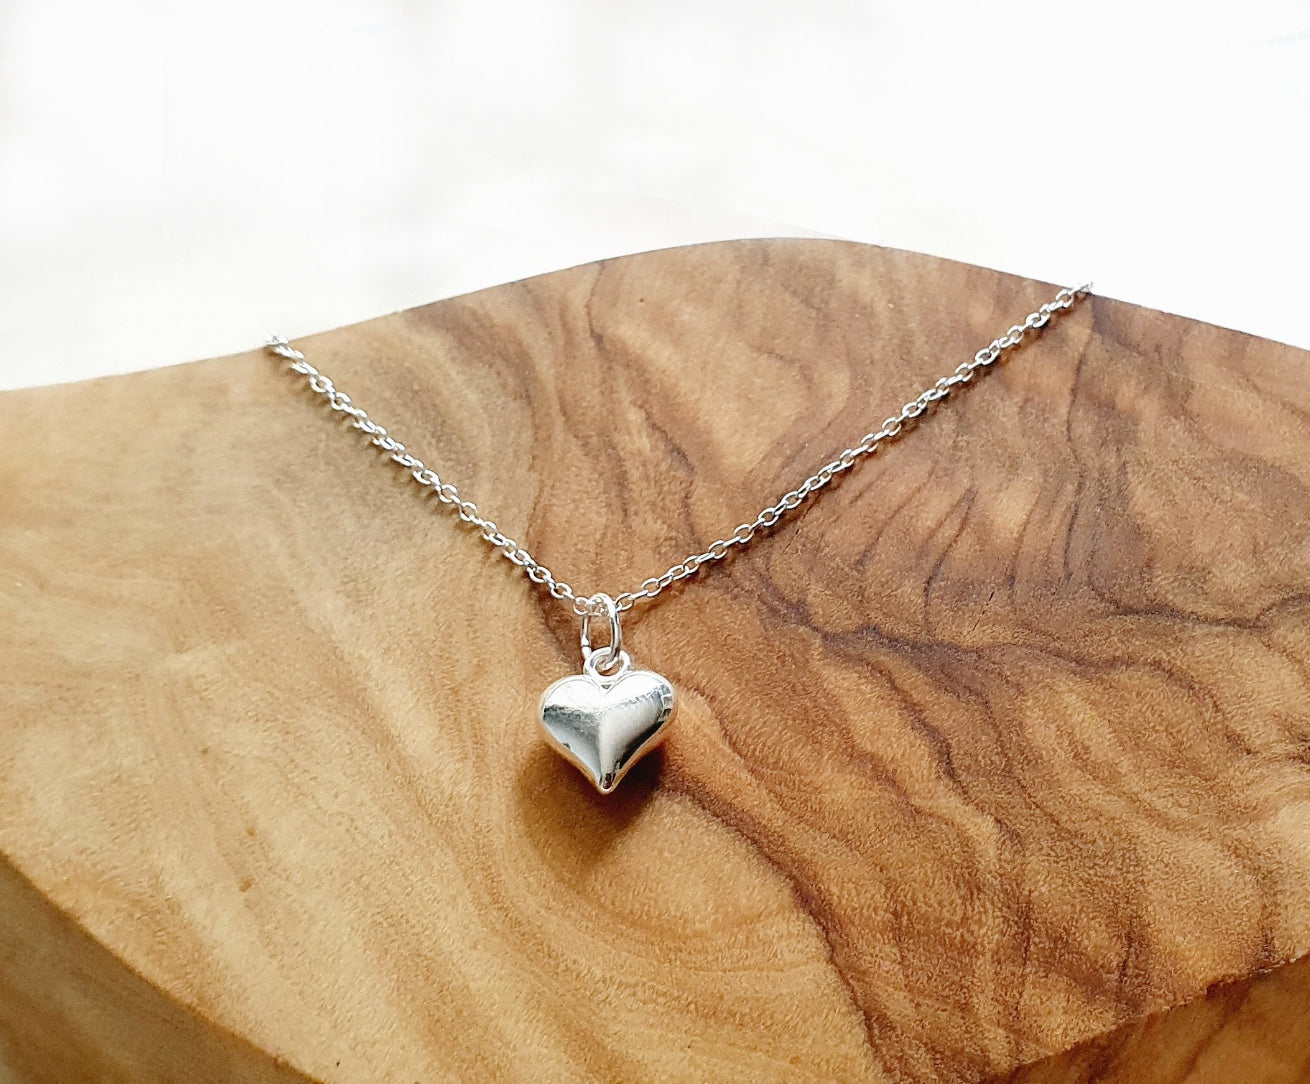 Bonus Daughter Puffy Heart Necklace with Birthstone in Sterling Silver 925, Personalised Gift